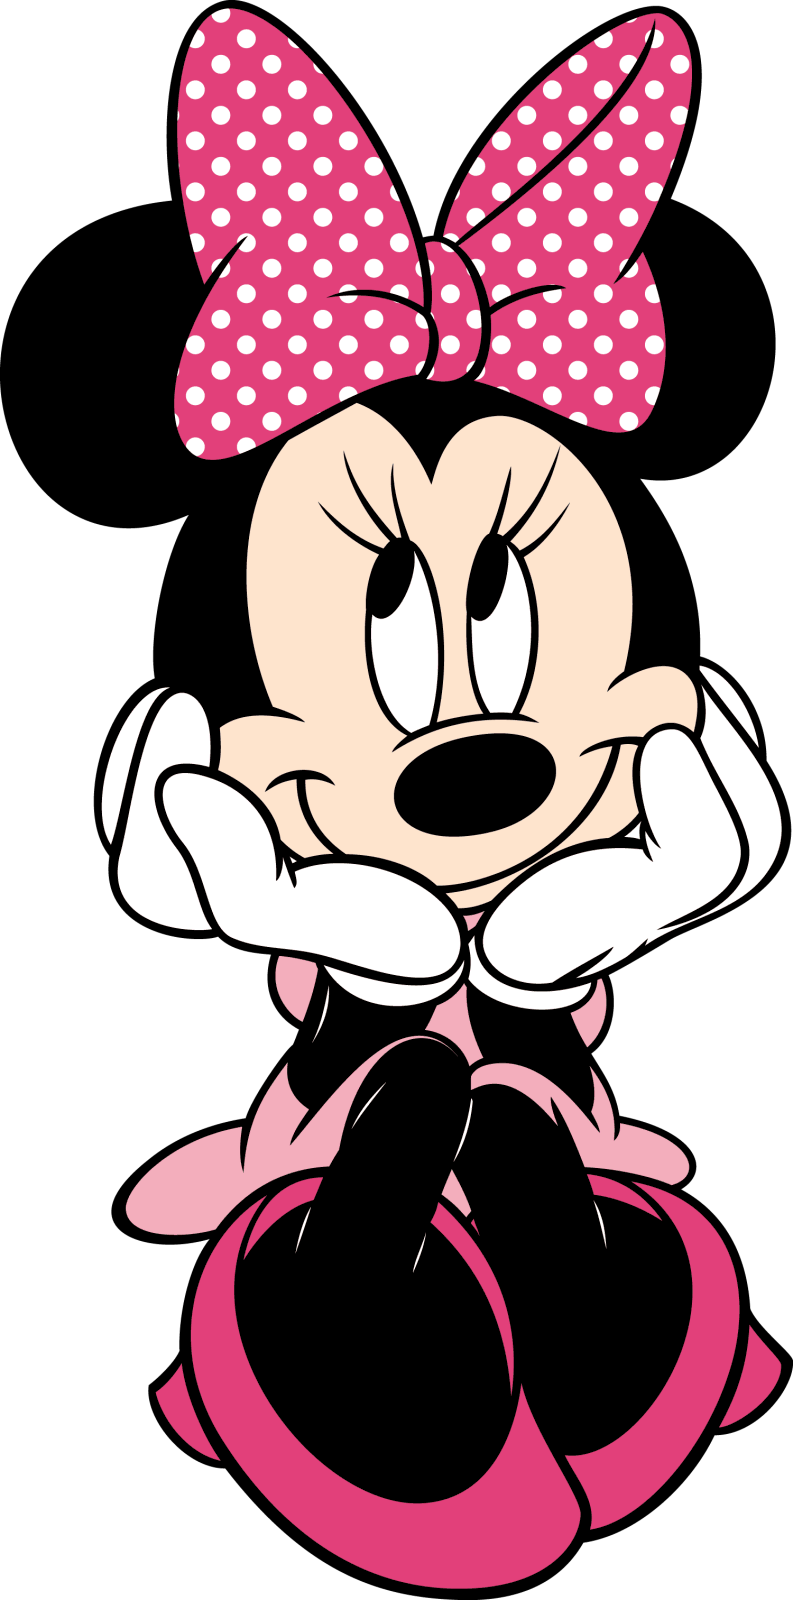 Hands clipart minnie mouse. Pin by shelly rowell